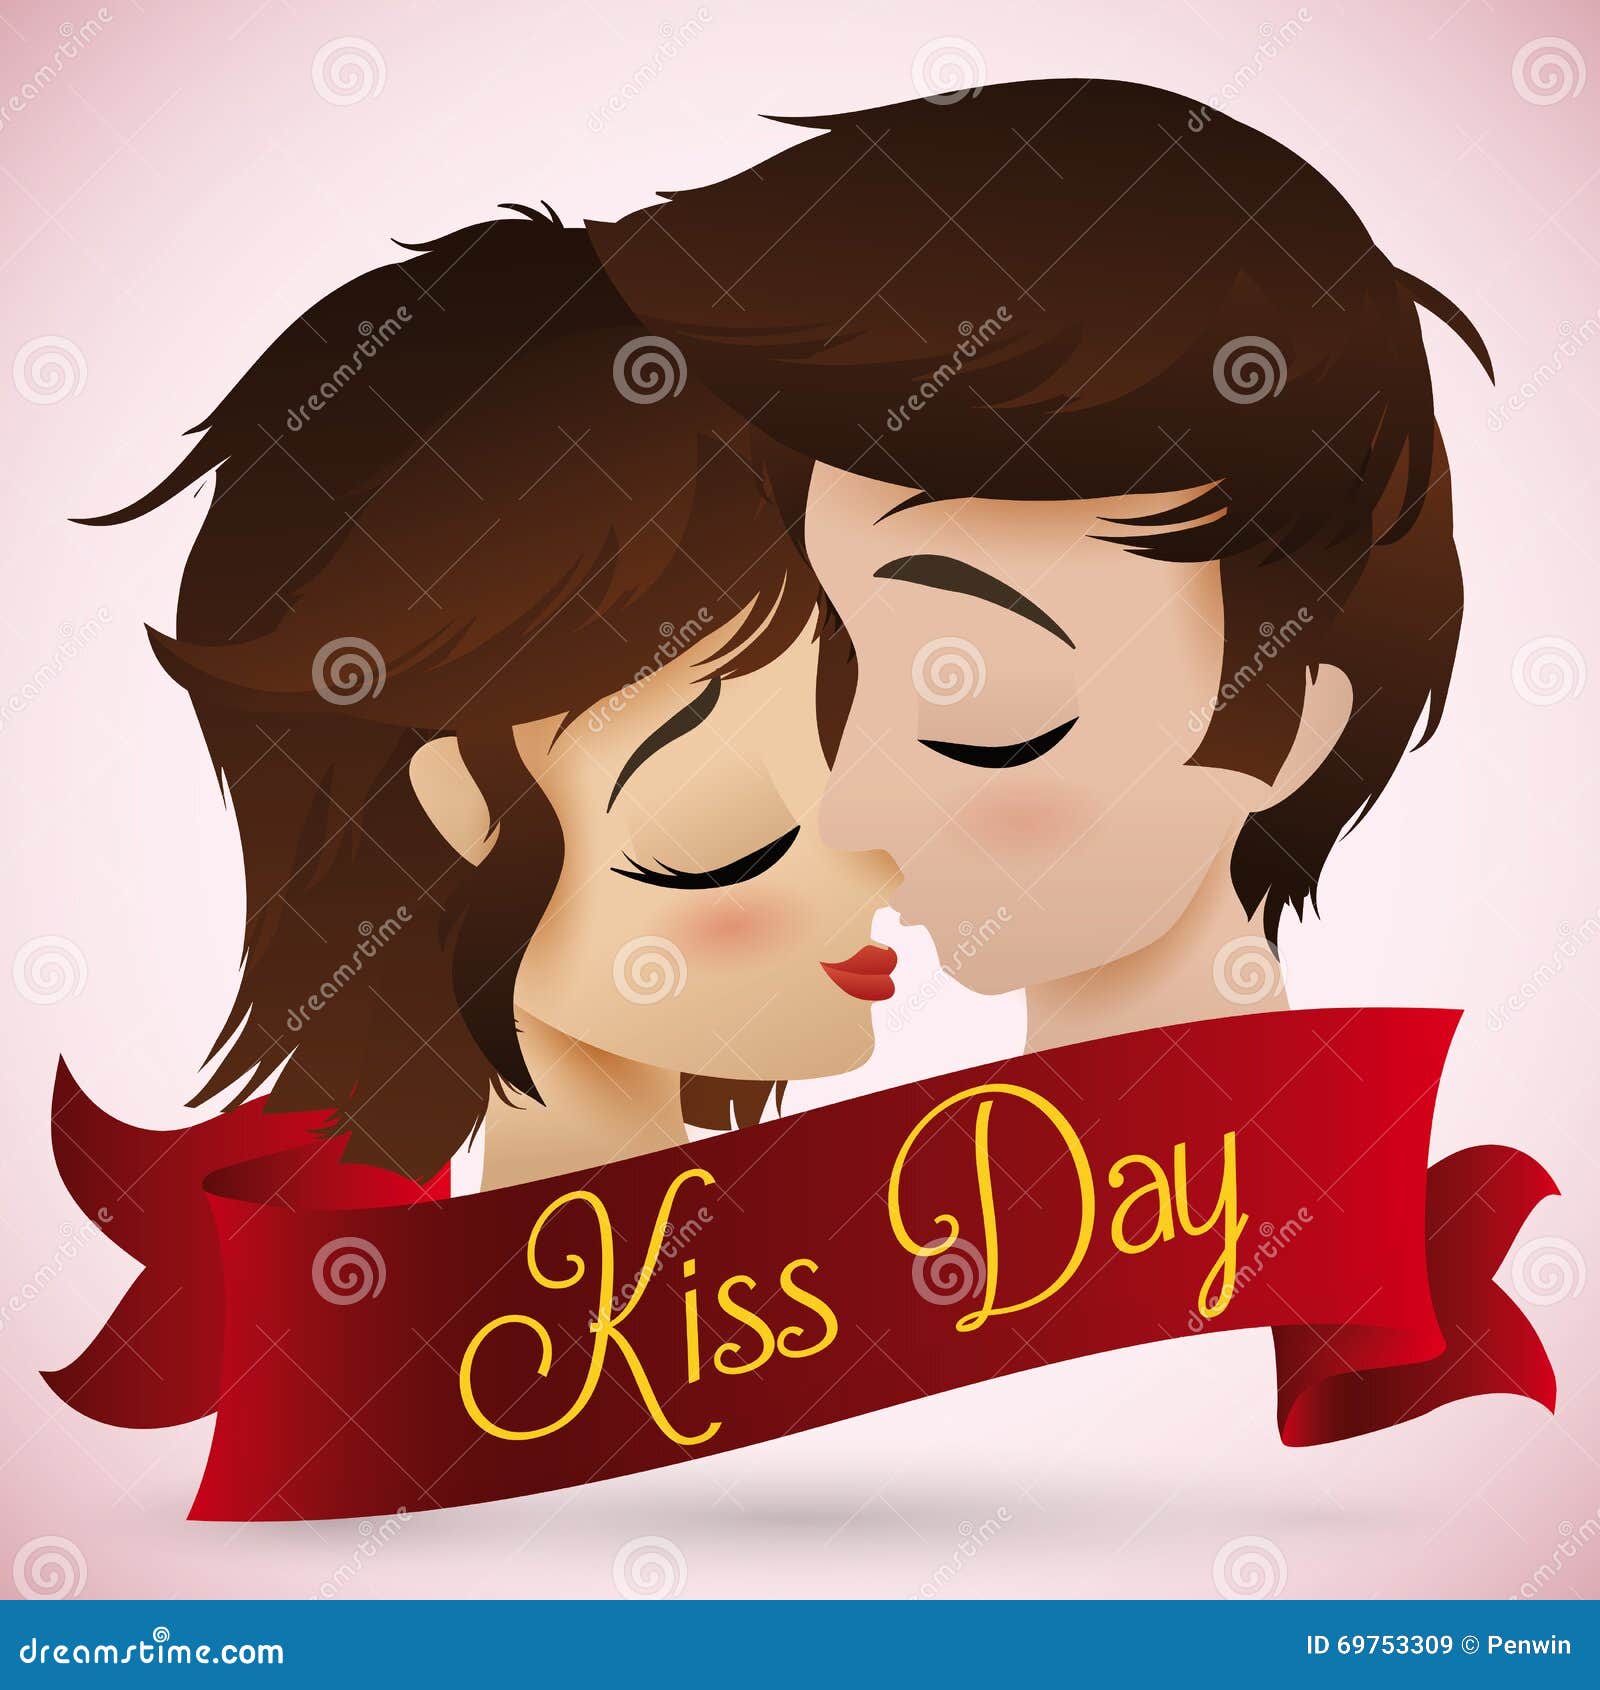 Romantic Couple Kissing for Kiss Day, Vector Illustration Stock ...